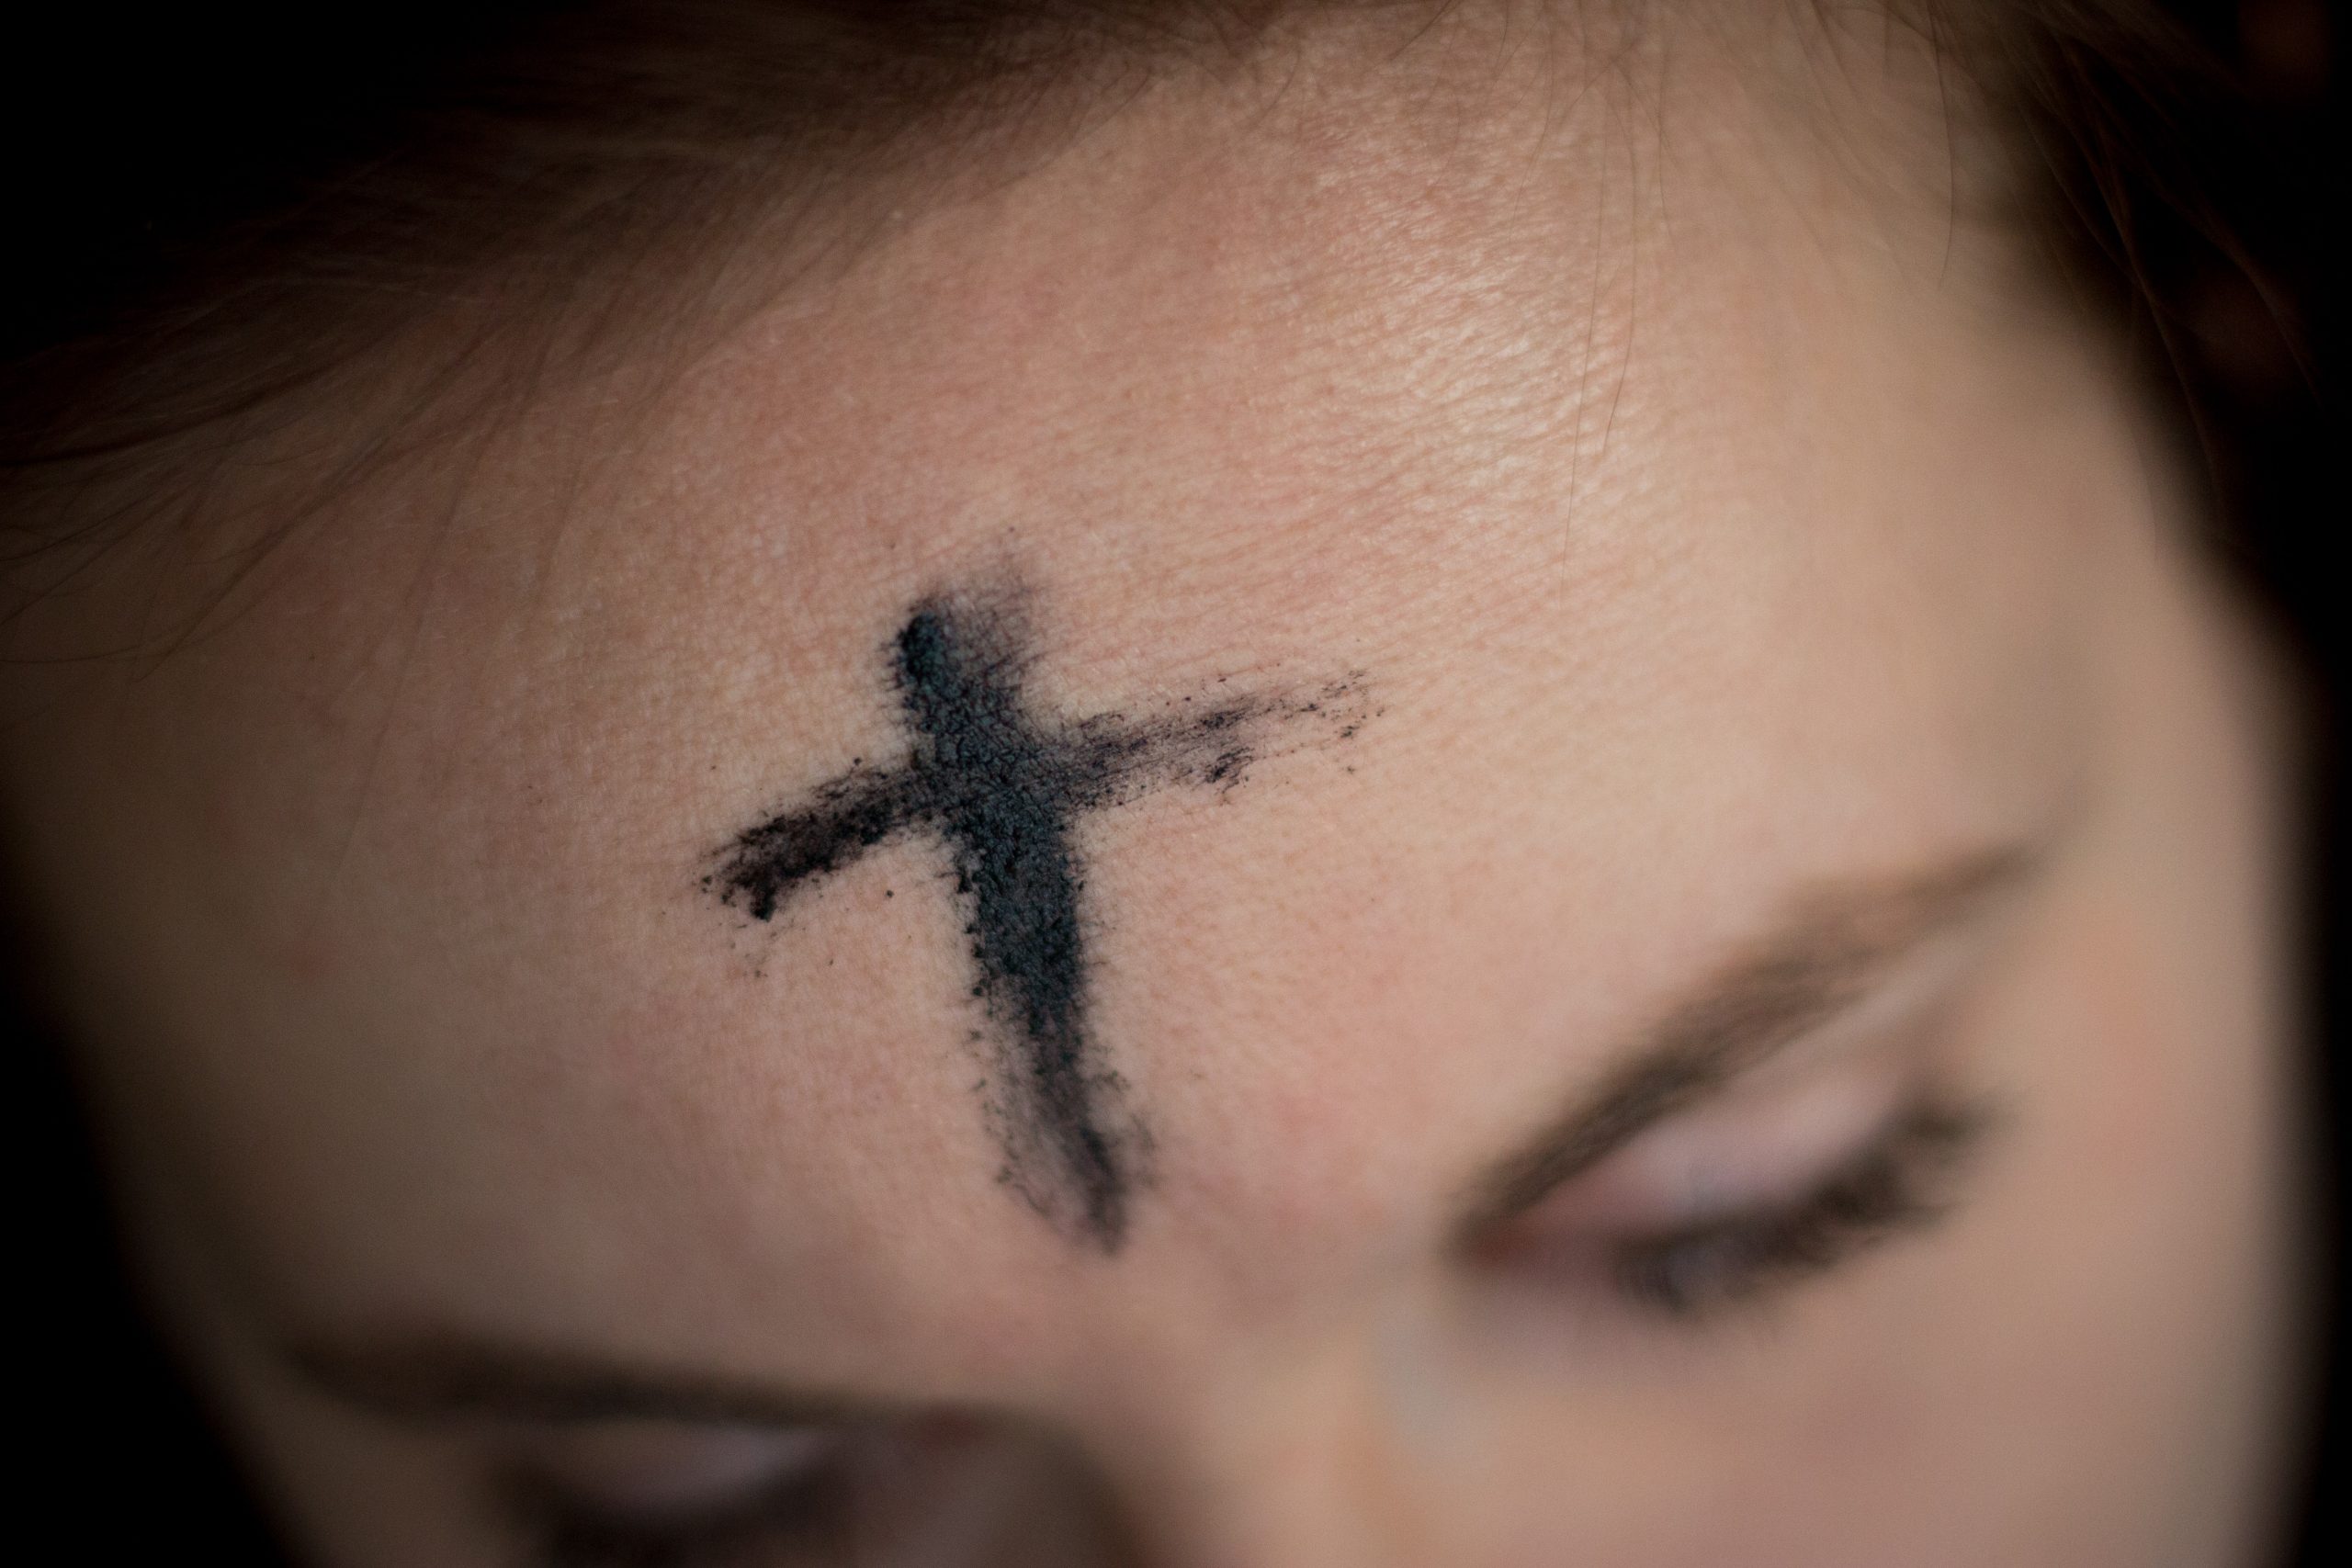 CBCP Implements Safety Guidelines for Ash Wednesday Celebration